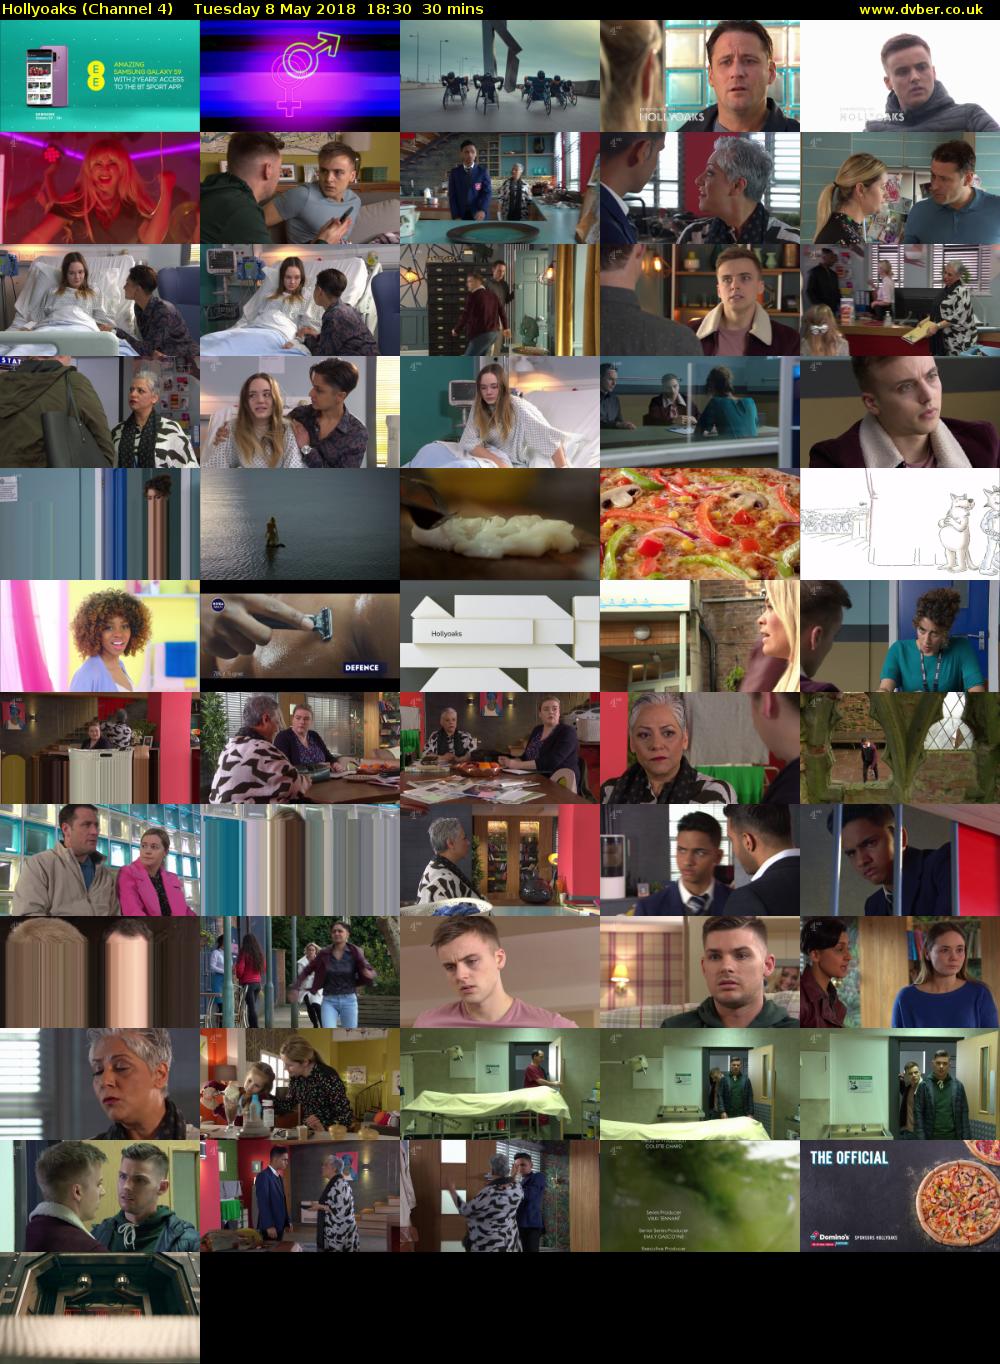 Hollyoaks (Channel 4) Tuesday 8 May 2018 18:30 - 19:00